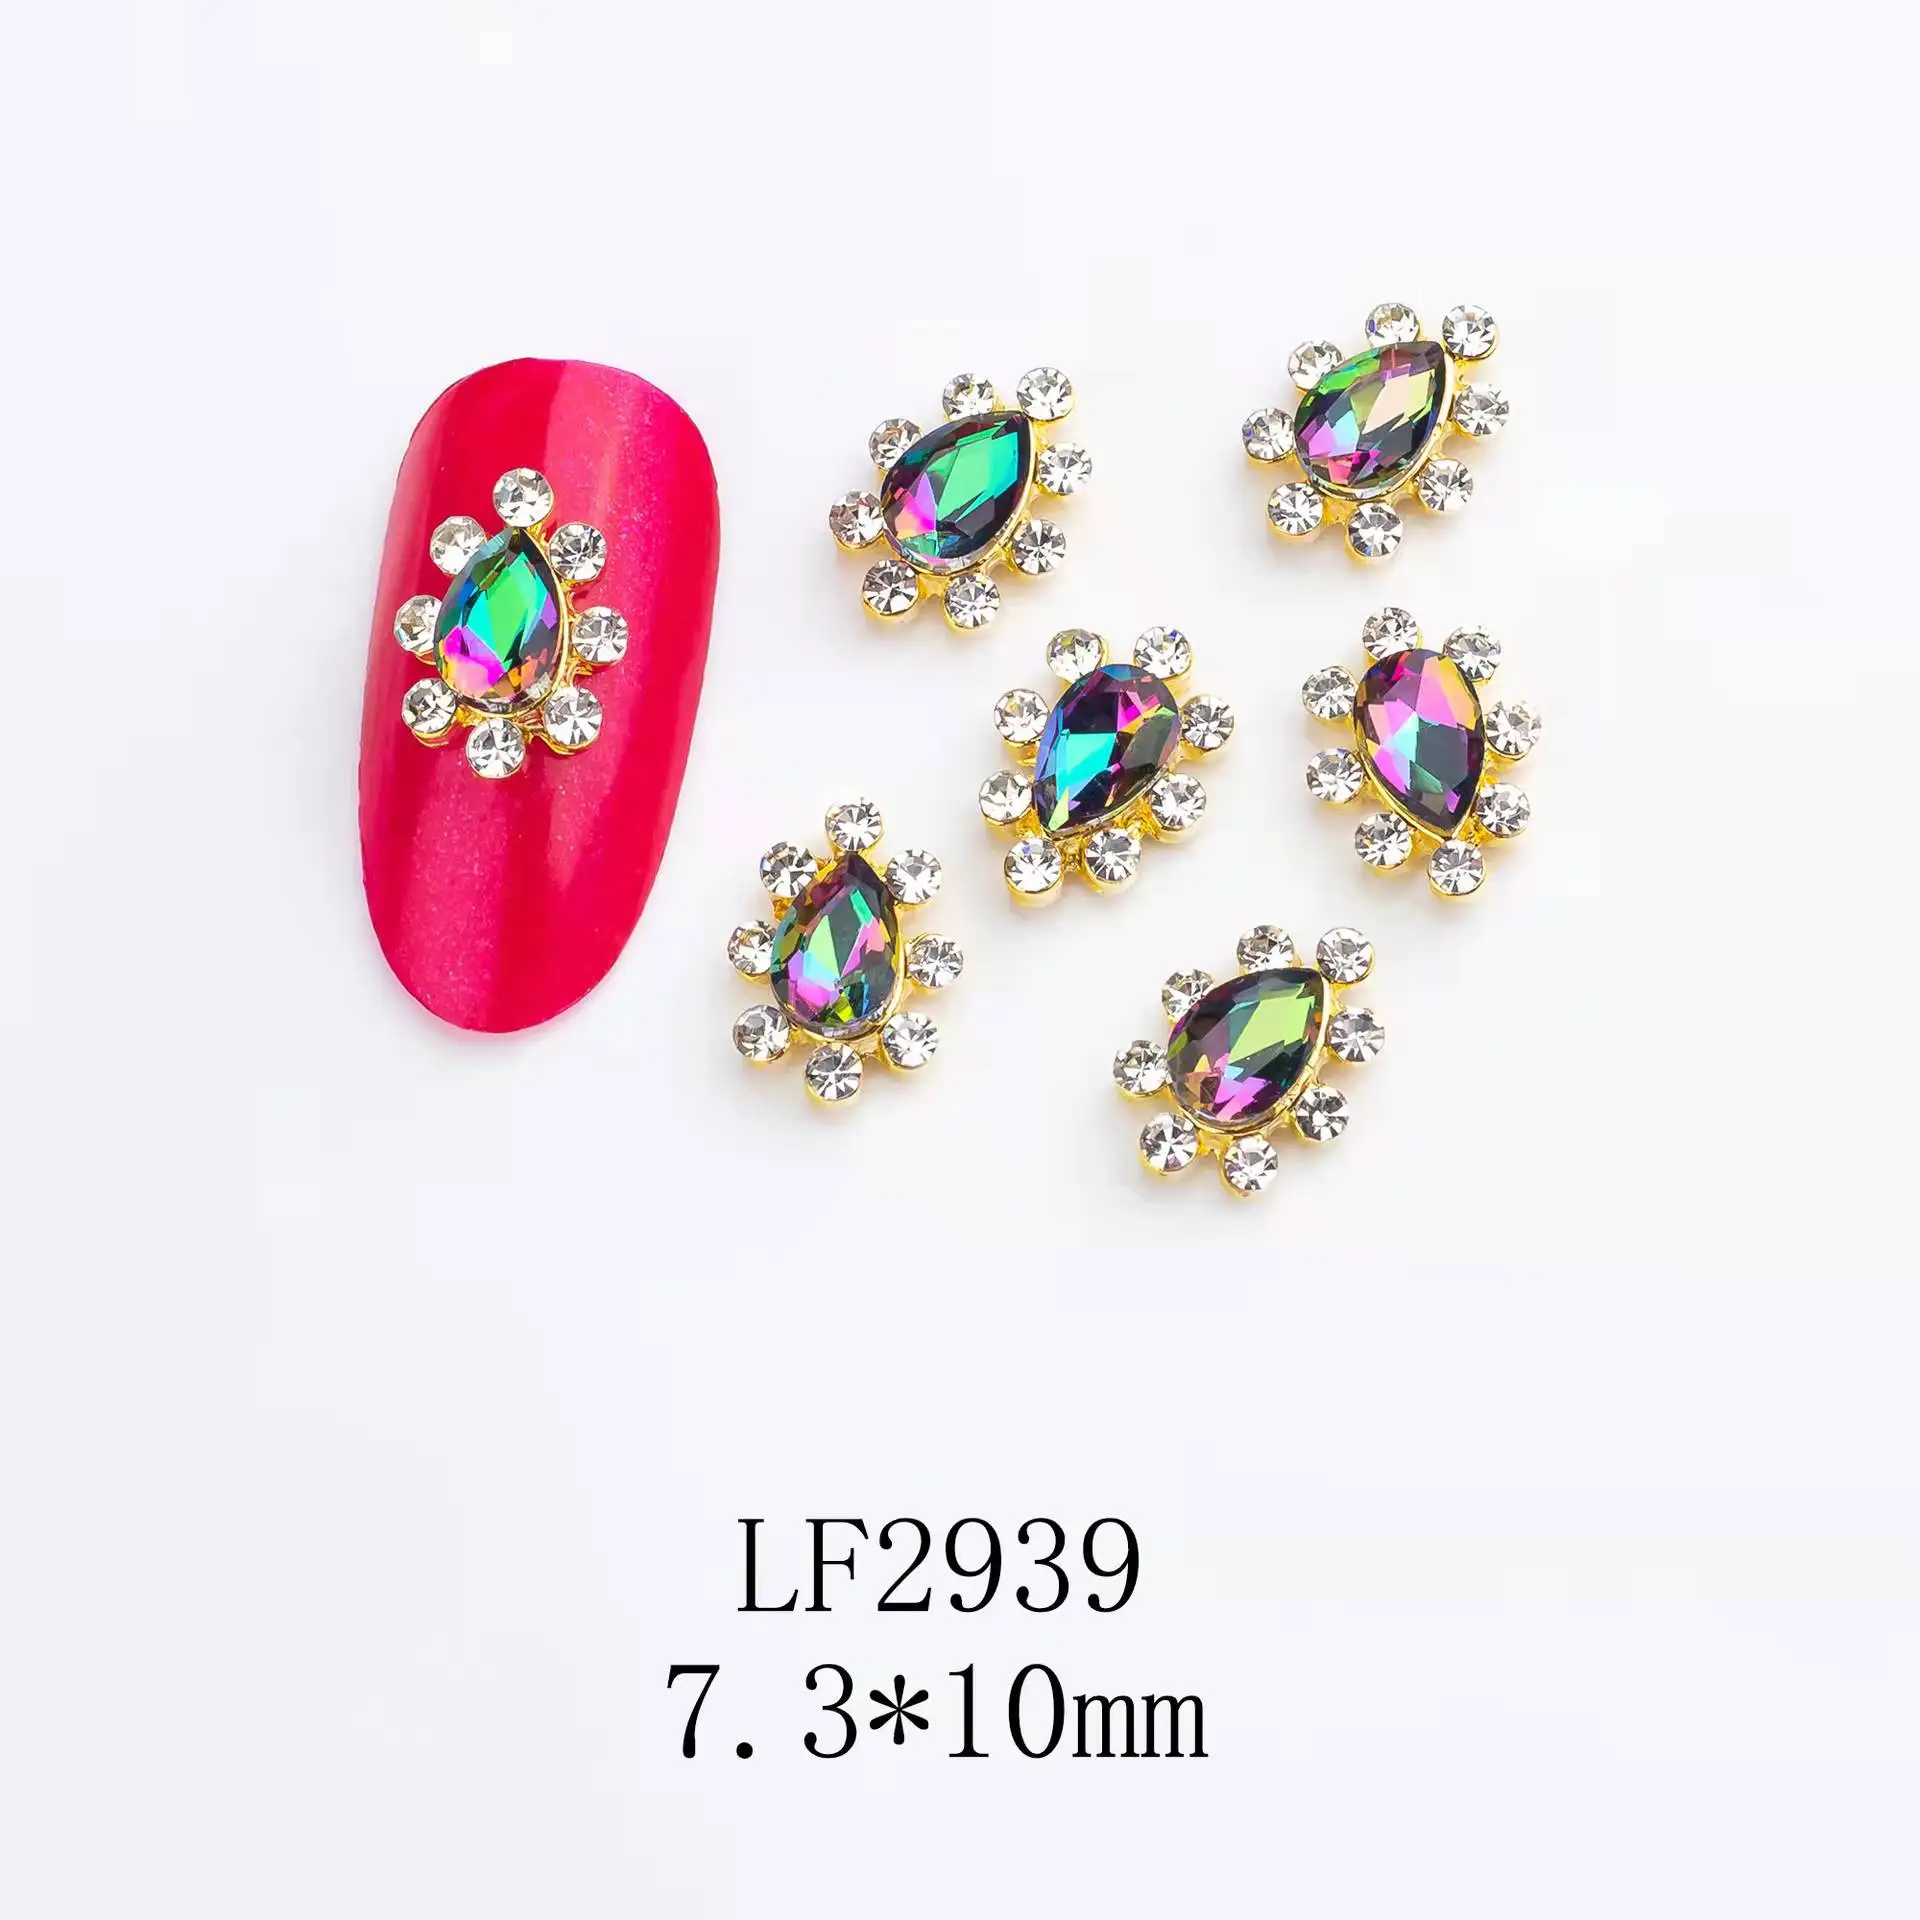 100Pcs Royal Crown Shiny Nail Art Rhinestones Crystal Romantic Design 3D Charms Crown/Heart/Snow Jewelry For Nails Accessories